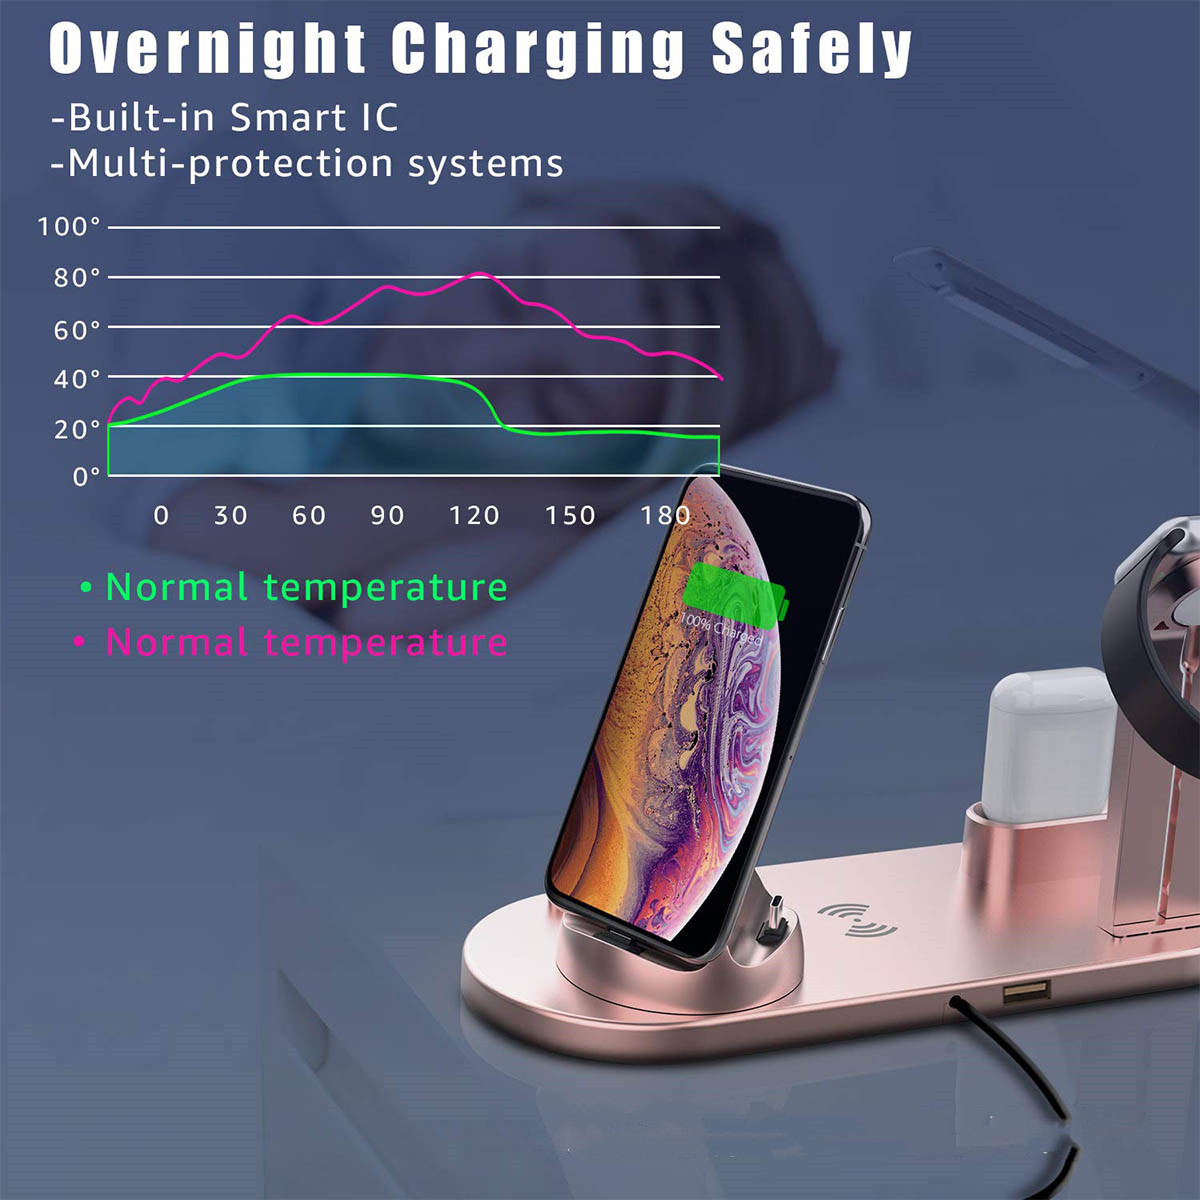 4-In-1-Qi-Wireless-Charger-Phone-Charger-Watch-Charger-Earbuds-Charger-for-Qi-enabled-Smart-Phones-f-1628323-4